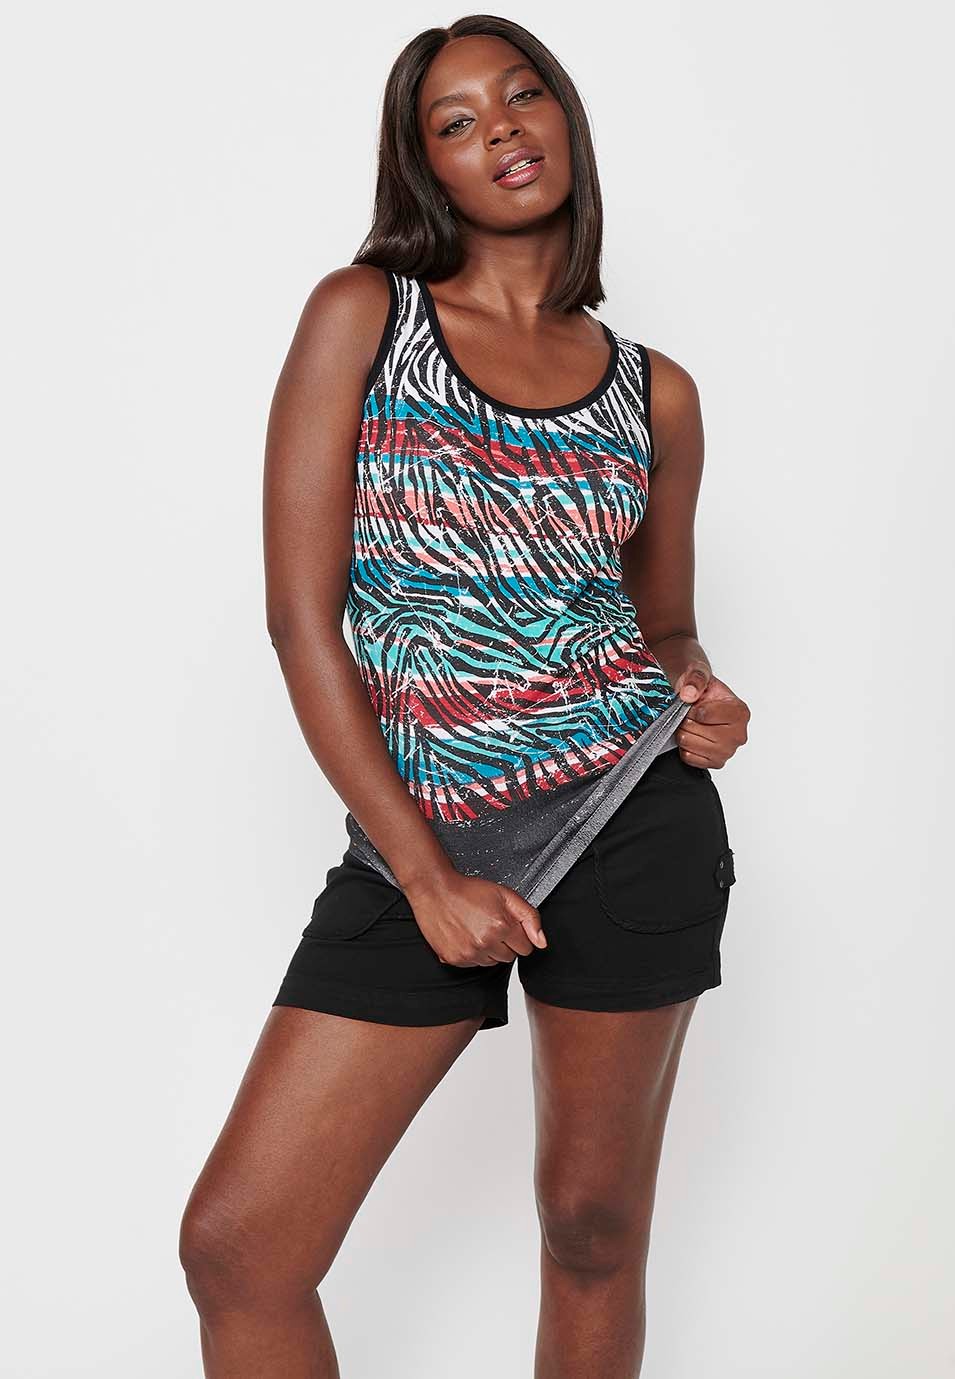 Women's Multicolor Round Neck Front Print Sleeveless T-shirt